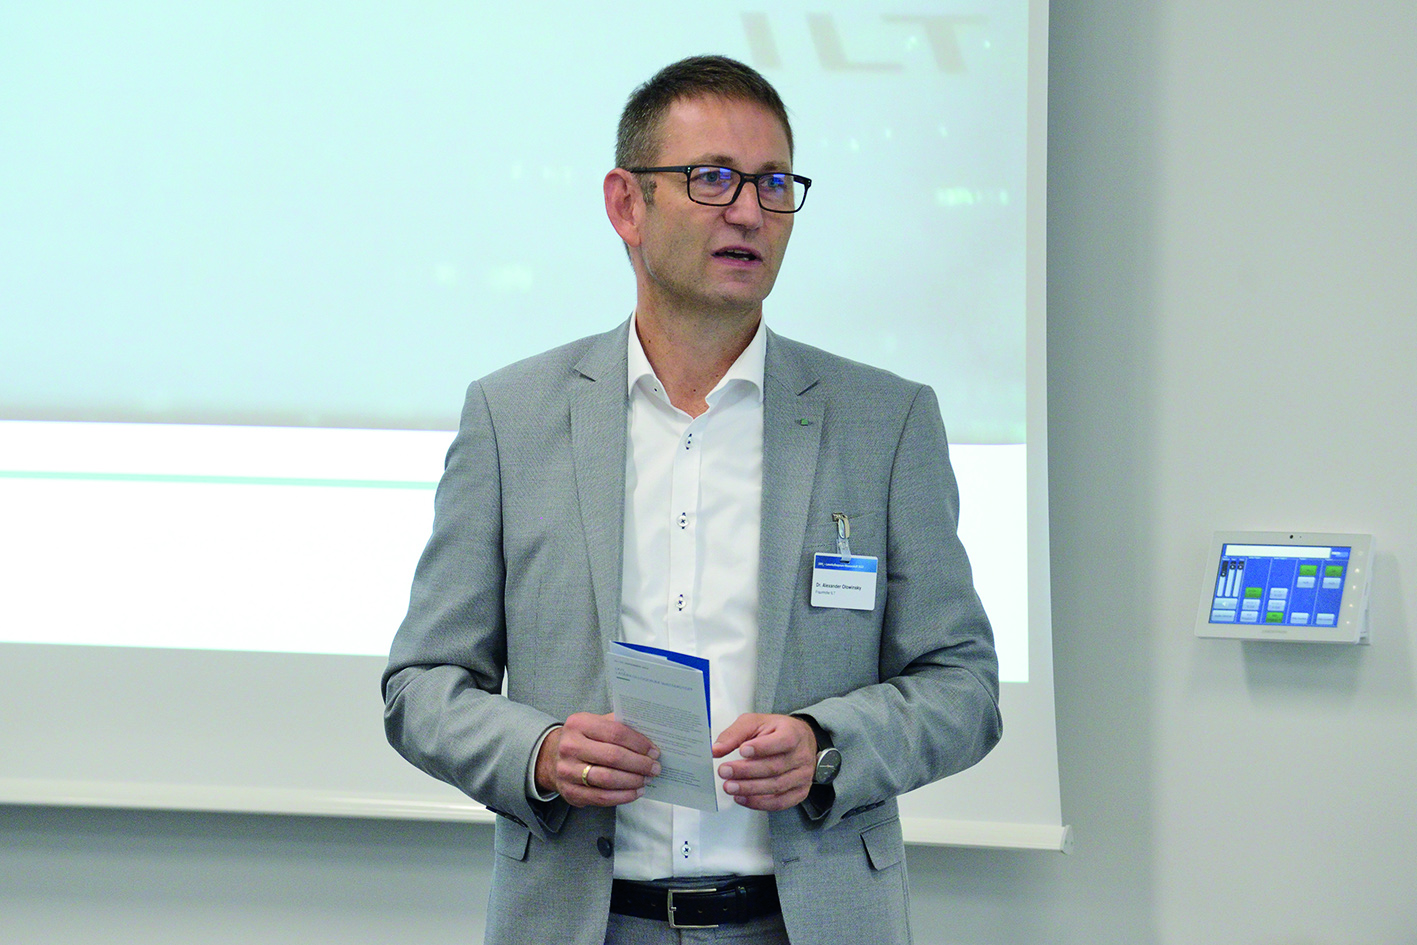 Dr. Alexander Olowinsky, head of the Joining and Cutting Department at Fraunhofer ILT: "When combined with inline process control for monitoring and documentation, laser-beam welding is an efficient and reproducible manufacturing process for high-rate production of metallic bipolar plates."